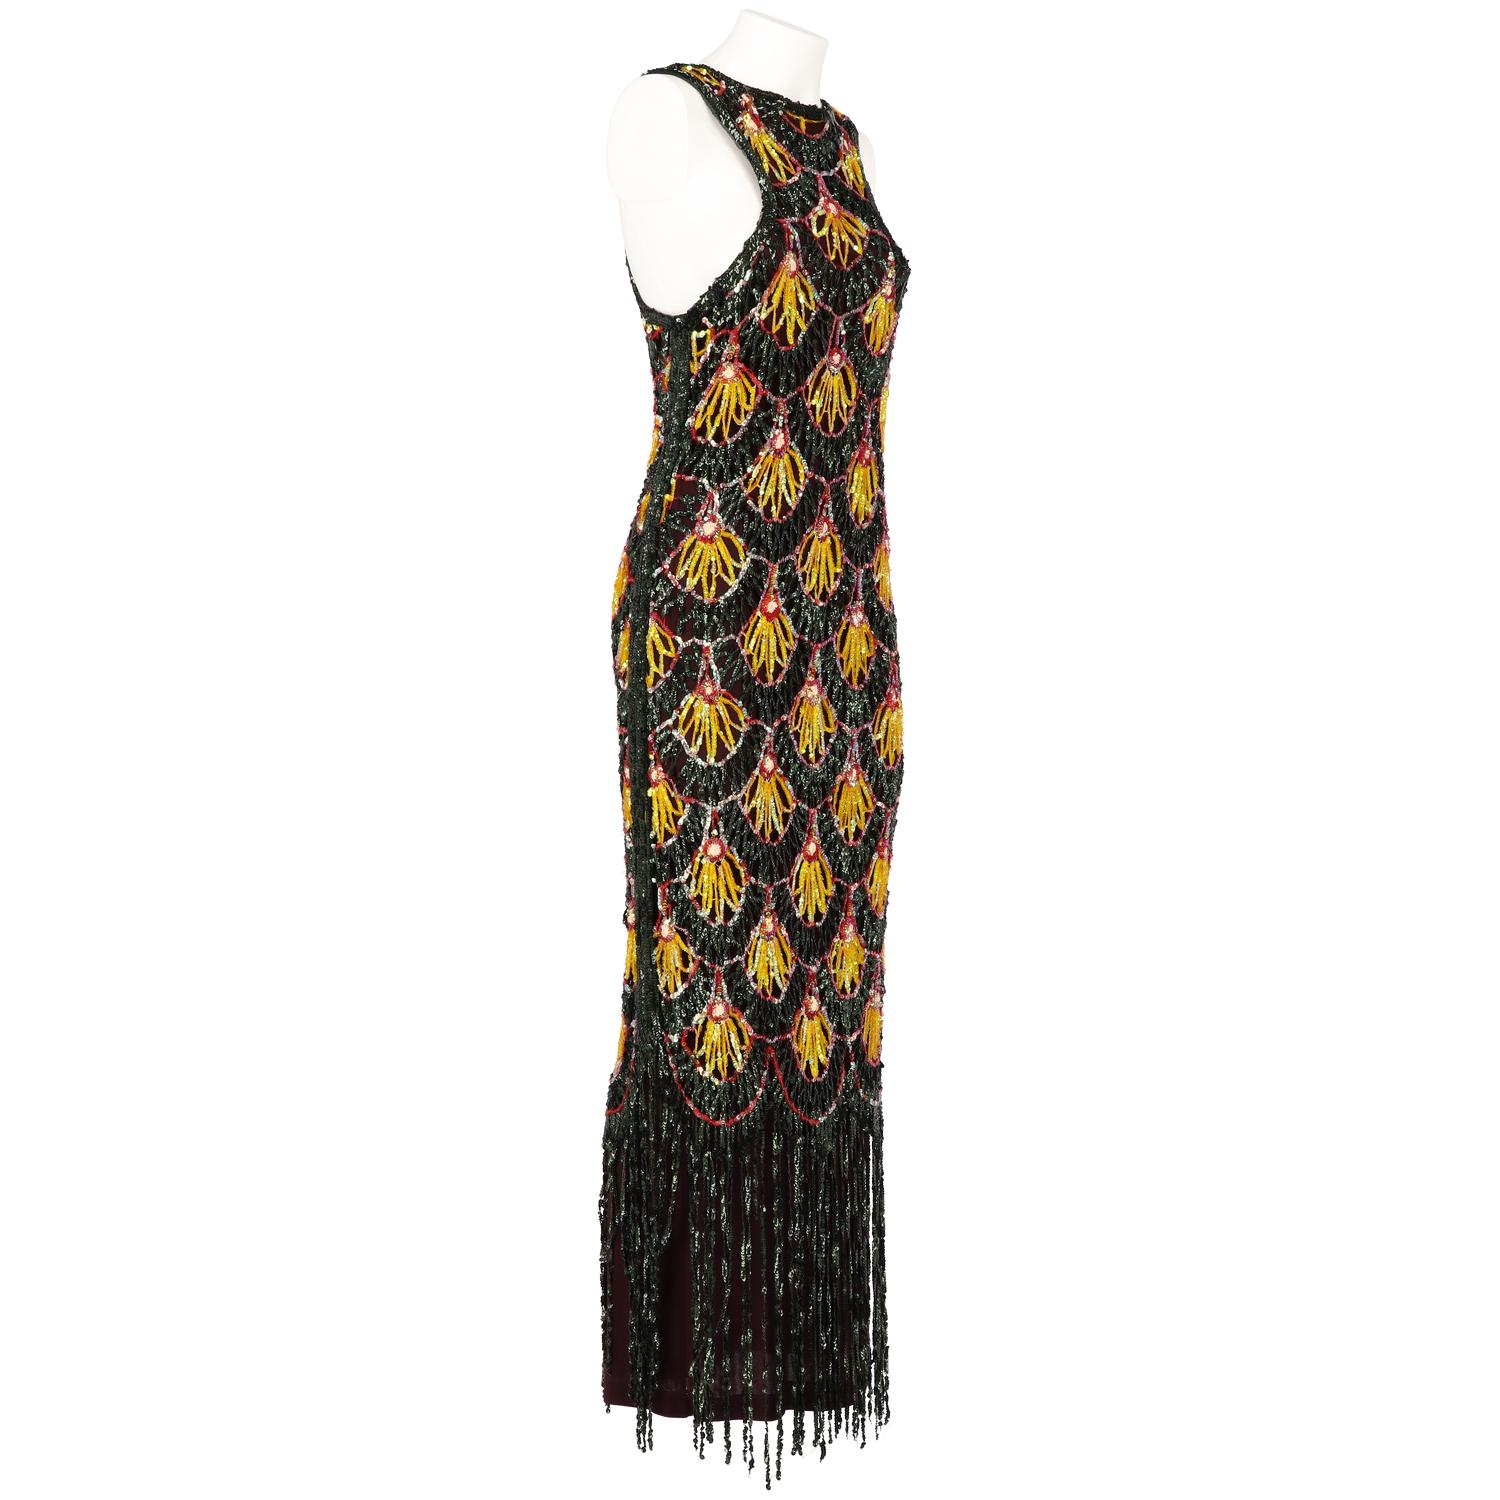 Eye-catching Jean Paul Gaultier sleeveless aubergine purple silk long dress embellished with multicolor shiny sequins. It features a round neck, cut-out lace effect and black sequins fringes at the bottom. The item is vintage, it was produced in the